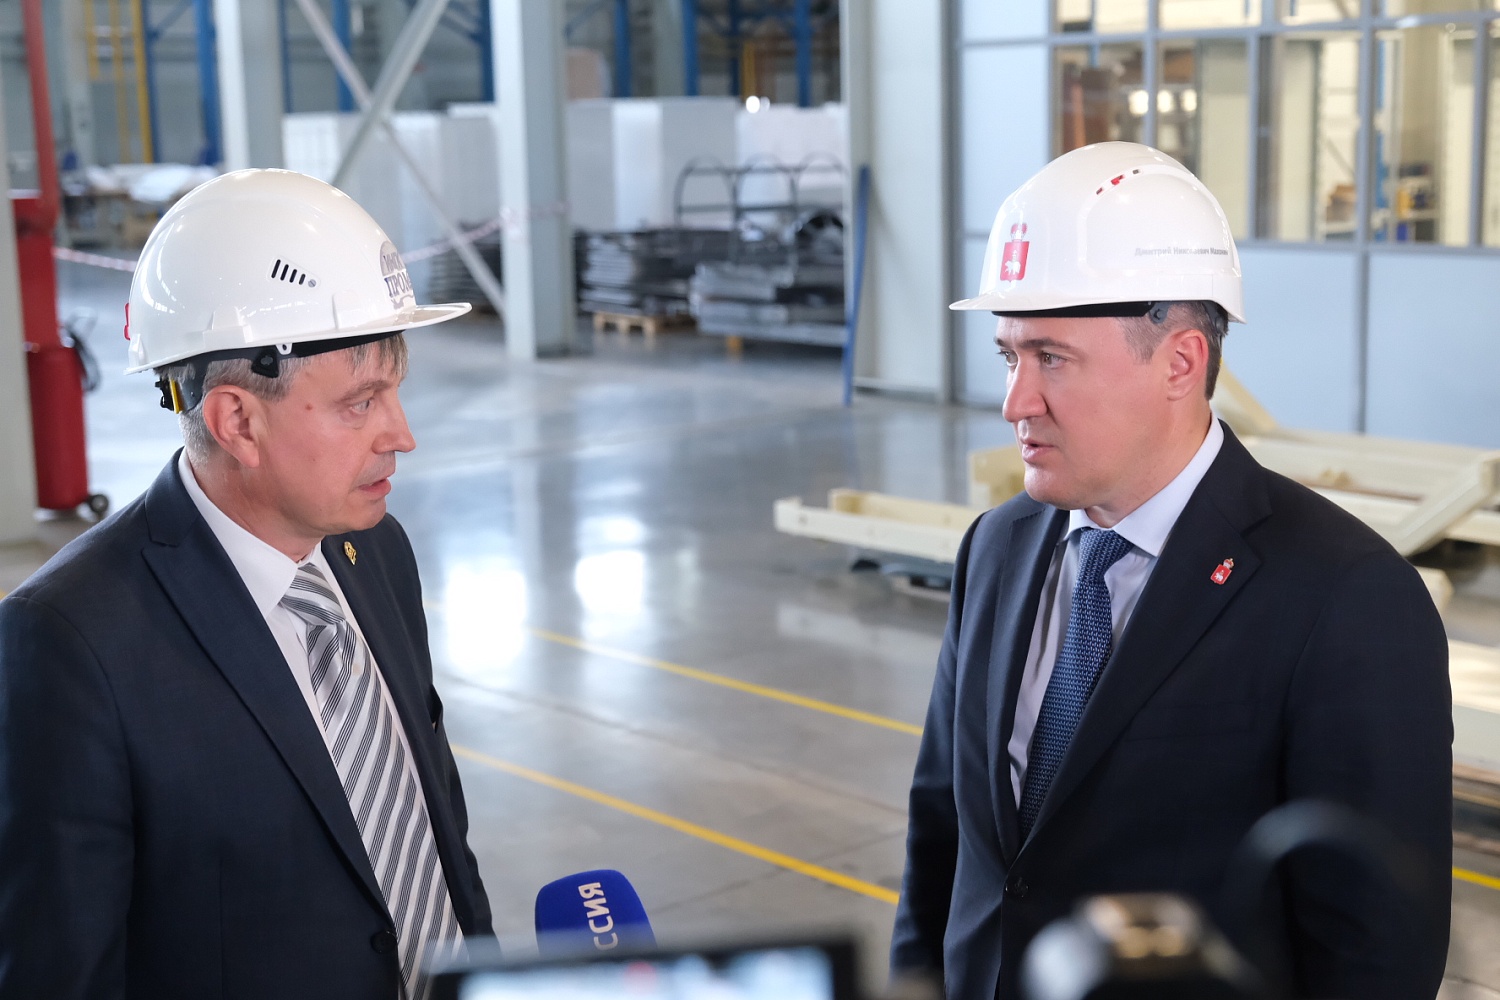 During his Working visit, the Governor of Perm Krai, Dmitry Makhonin, Has Visited a New Production Shop of INGC Company in Perm